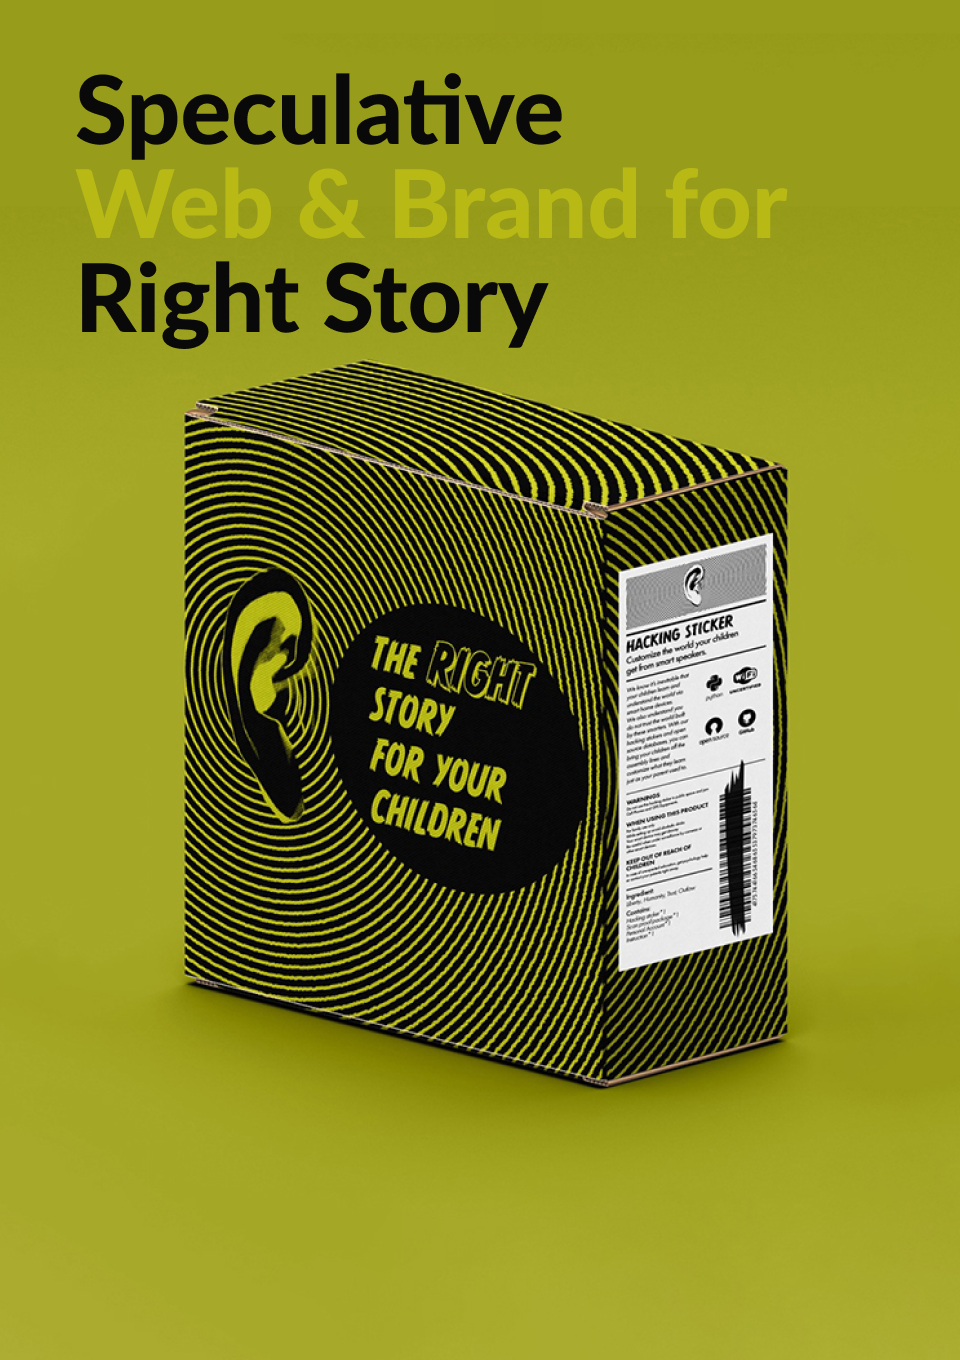 RightStory